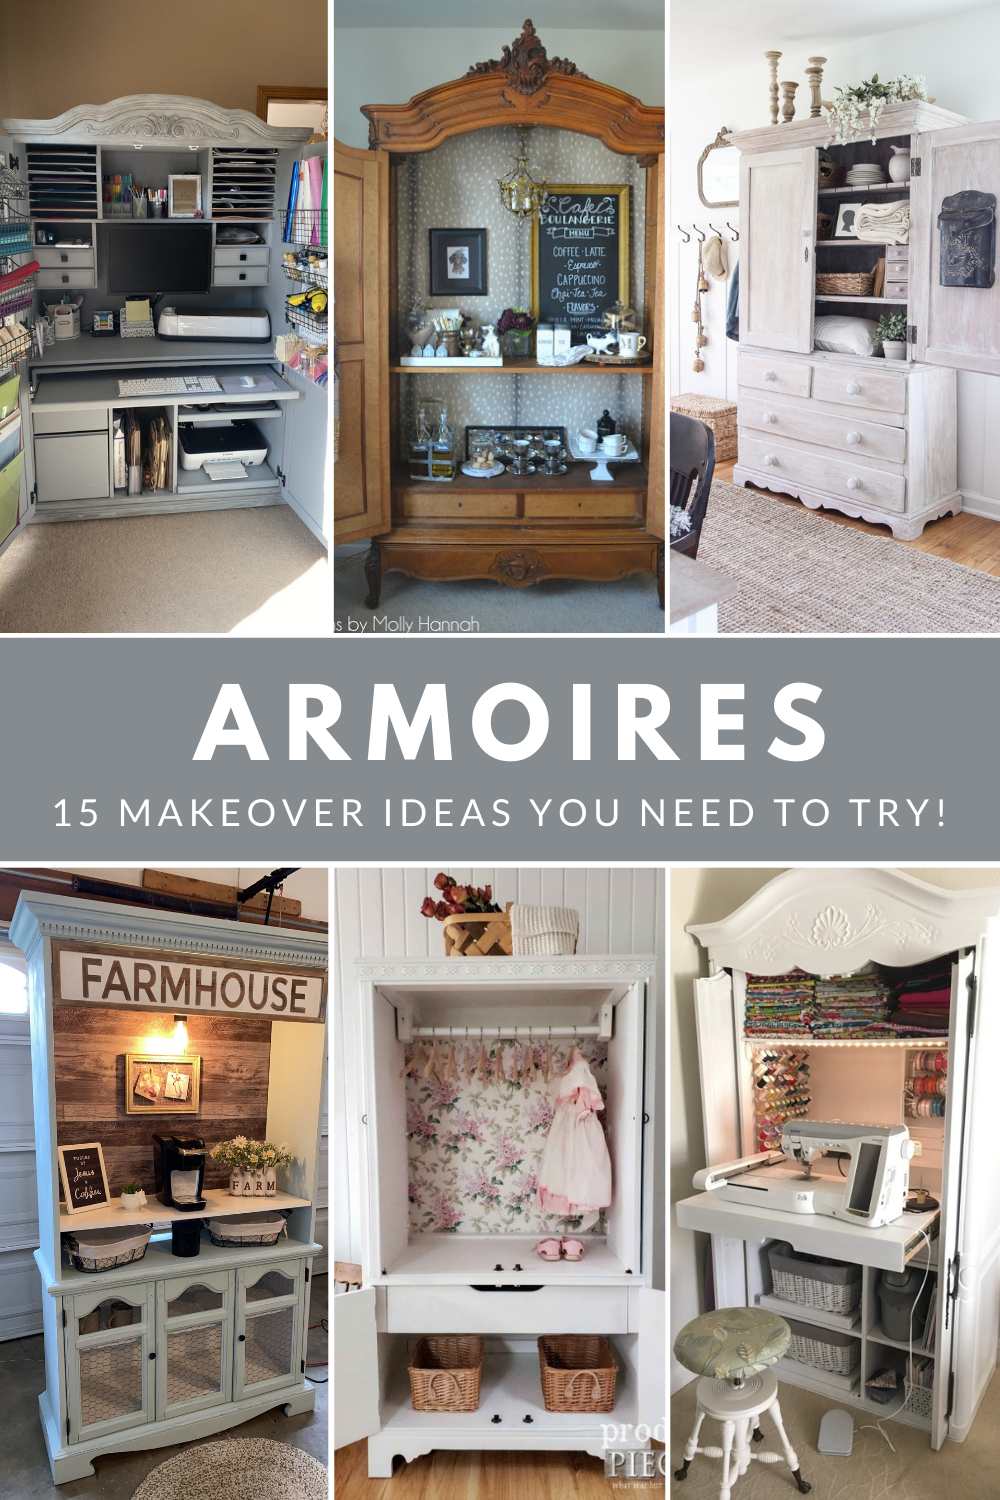 Giving old furniture a makeover is a great way to be creative, save money and help the environment. Check out these genius repurposed armoire ideas for every room in your house!